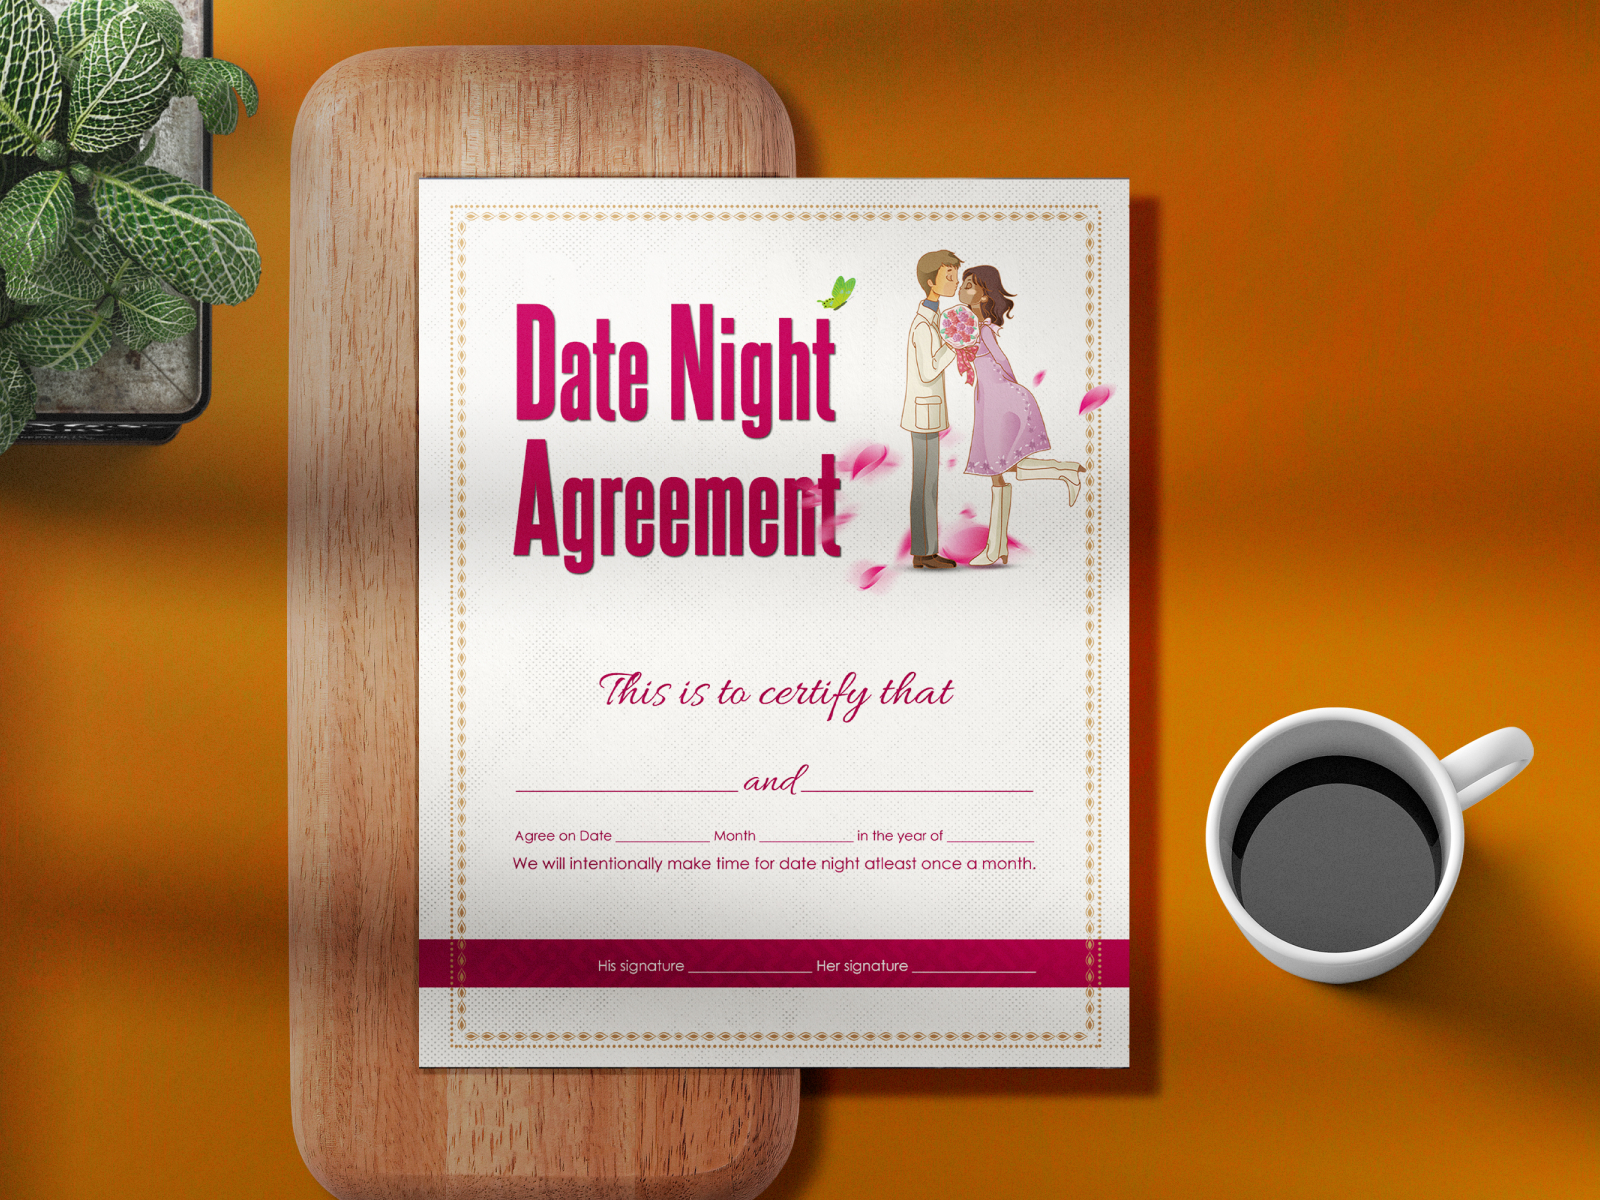 date-night-couple-agreement-certificate-by-creative-hivee-on-dribbble